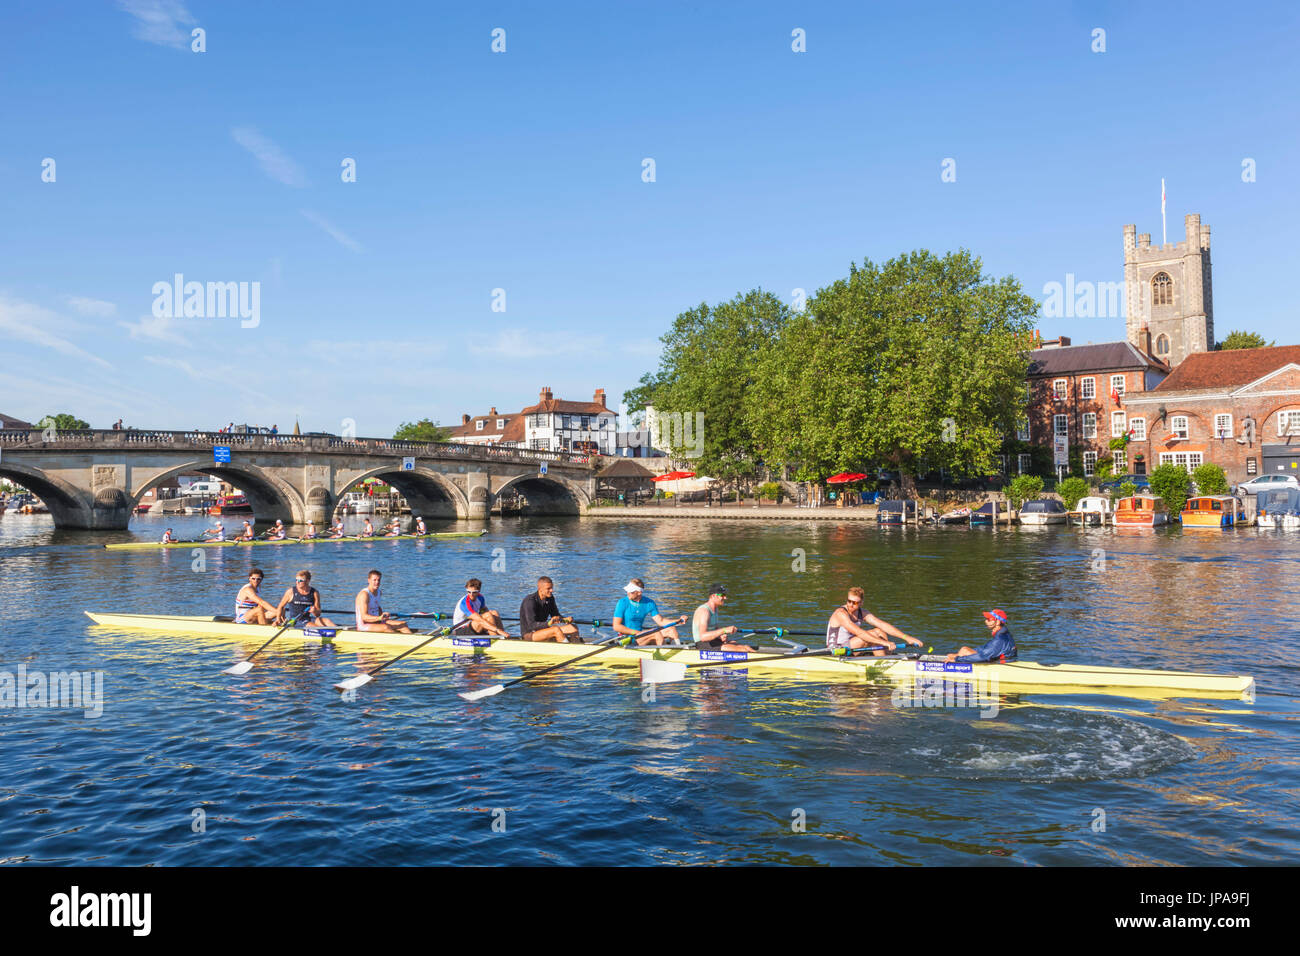 England, Oxfordshire, Henley-on-Thames, Town Skyline and Rowers on River Thames Stock Photo